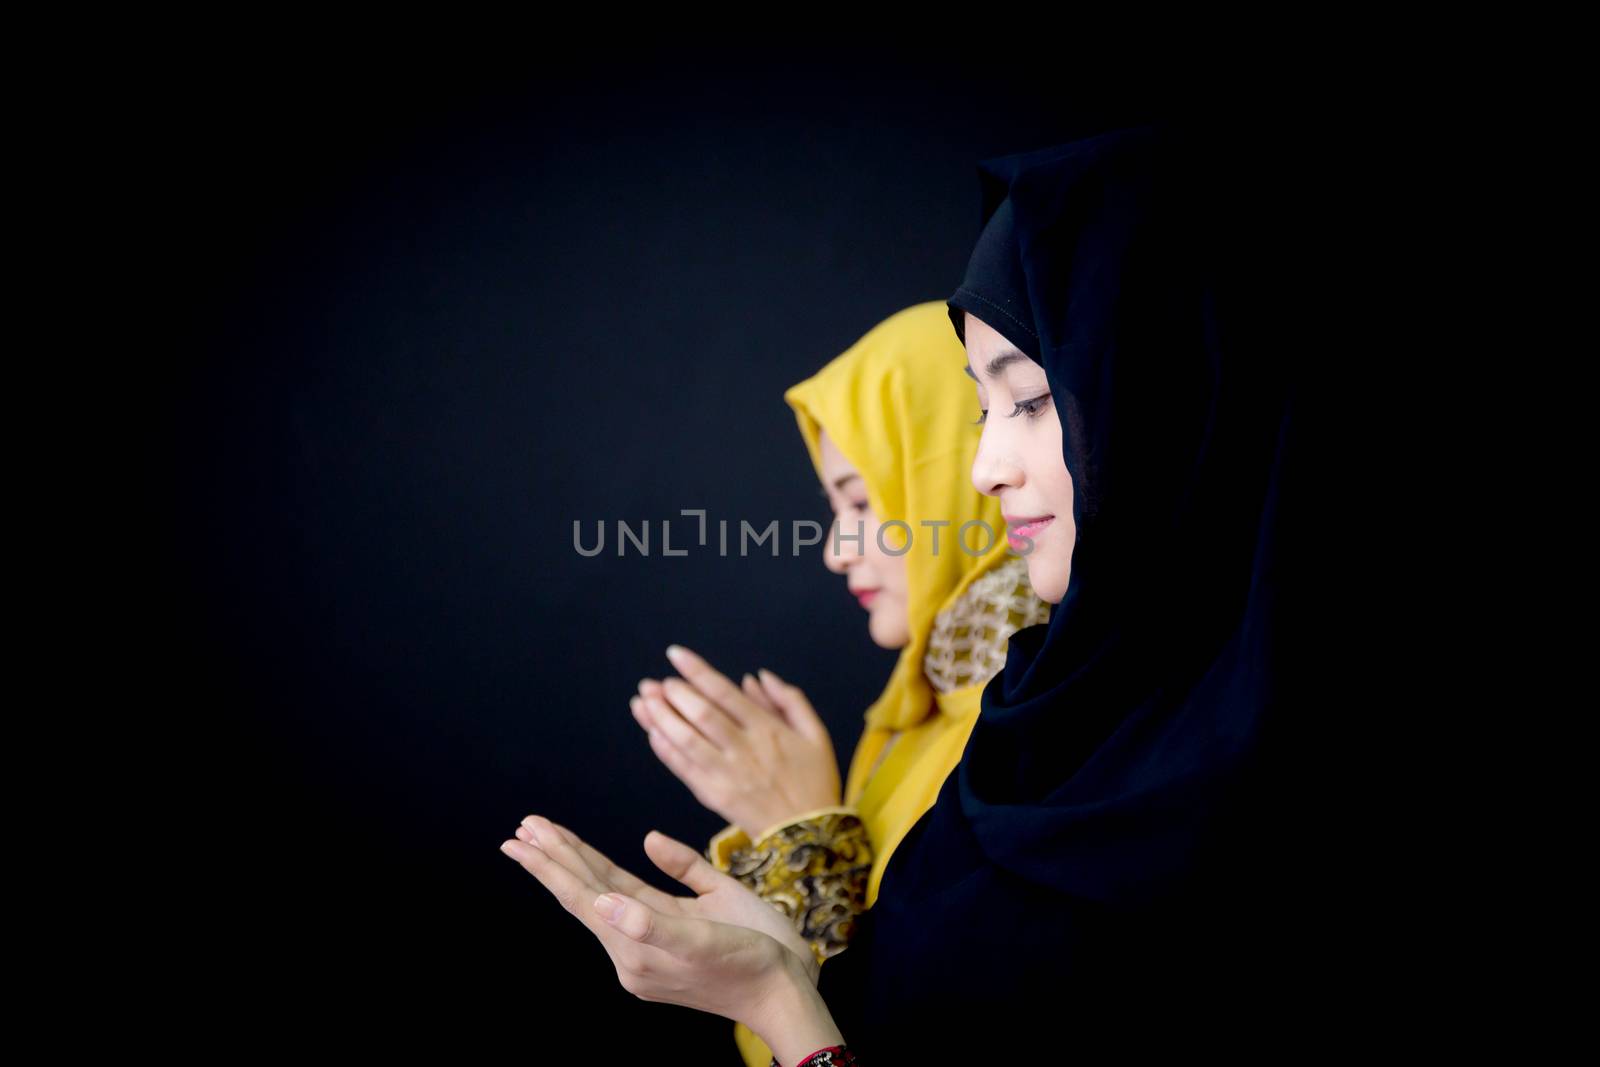 religious young Muslim two women praying over black background.